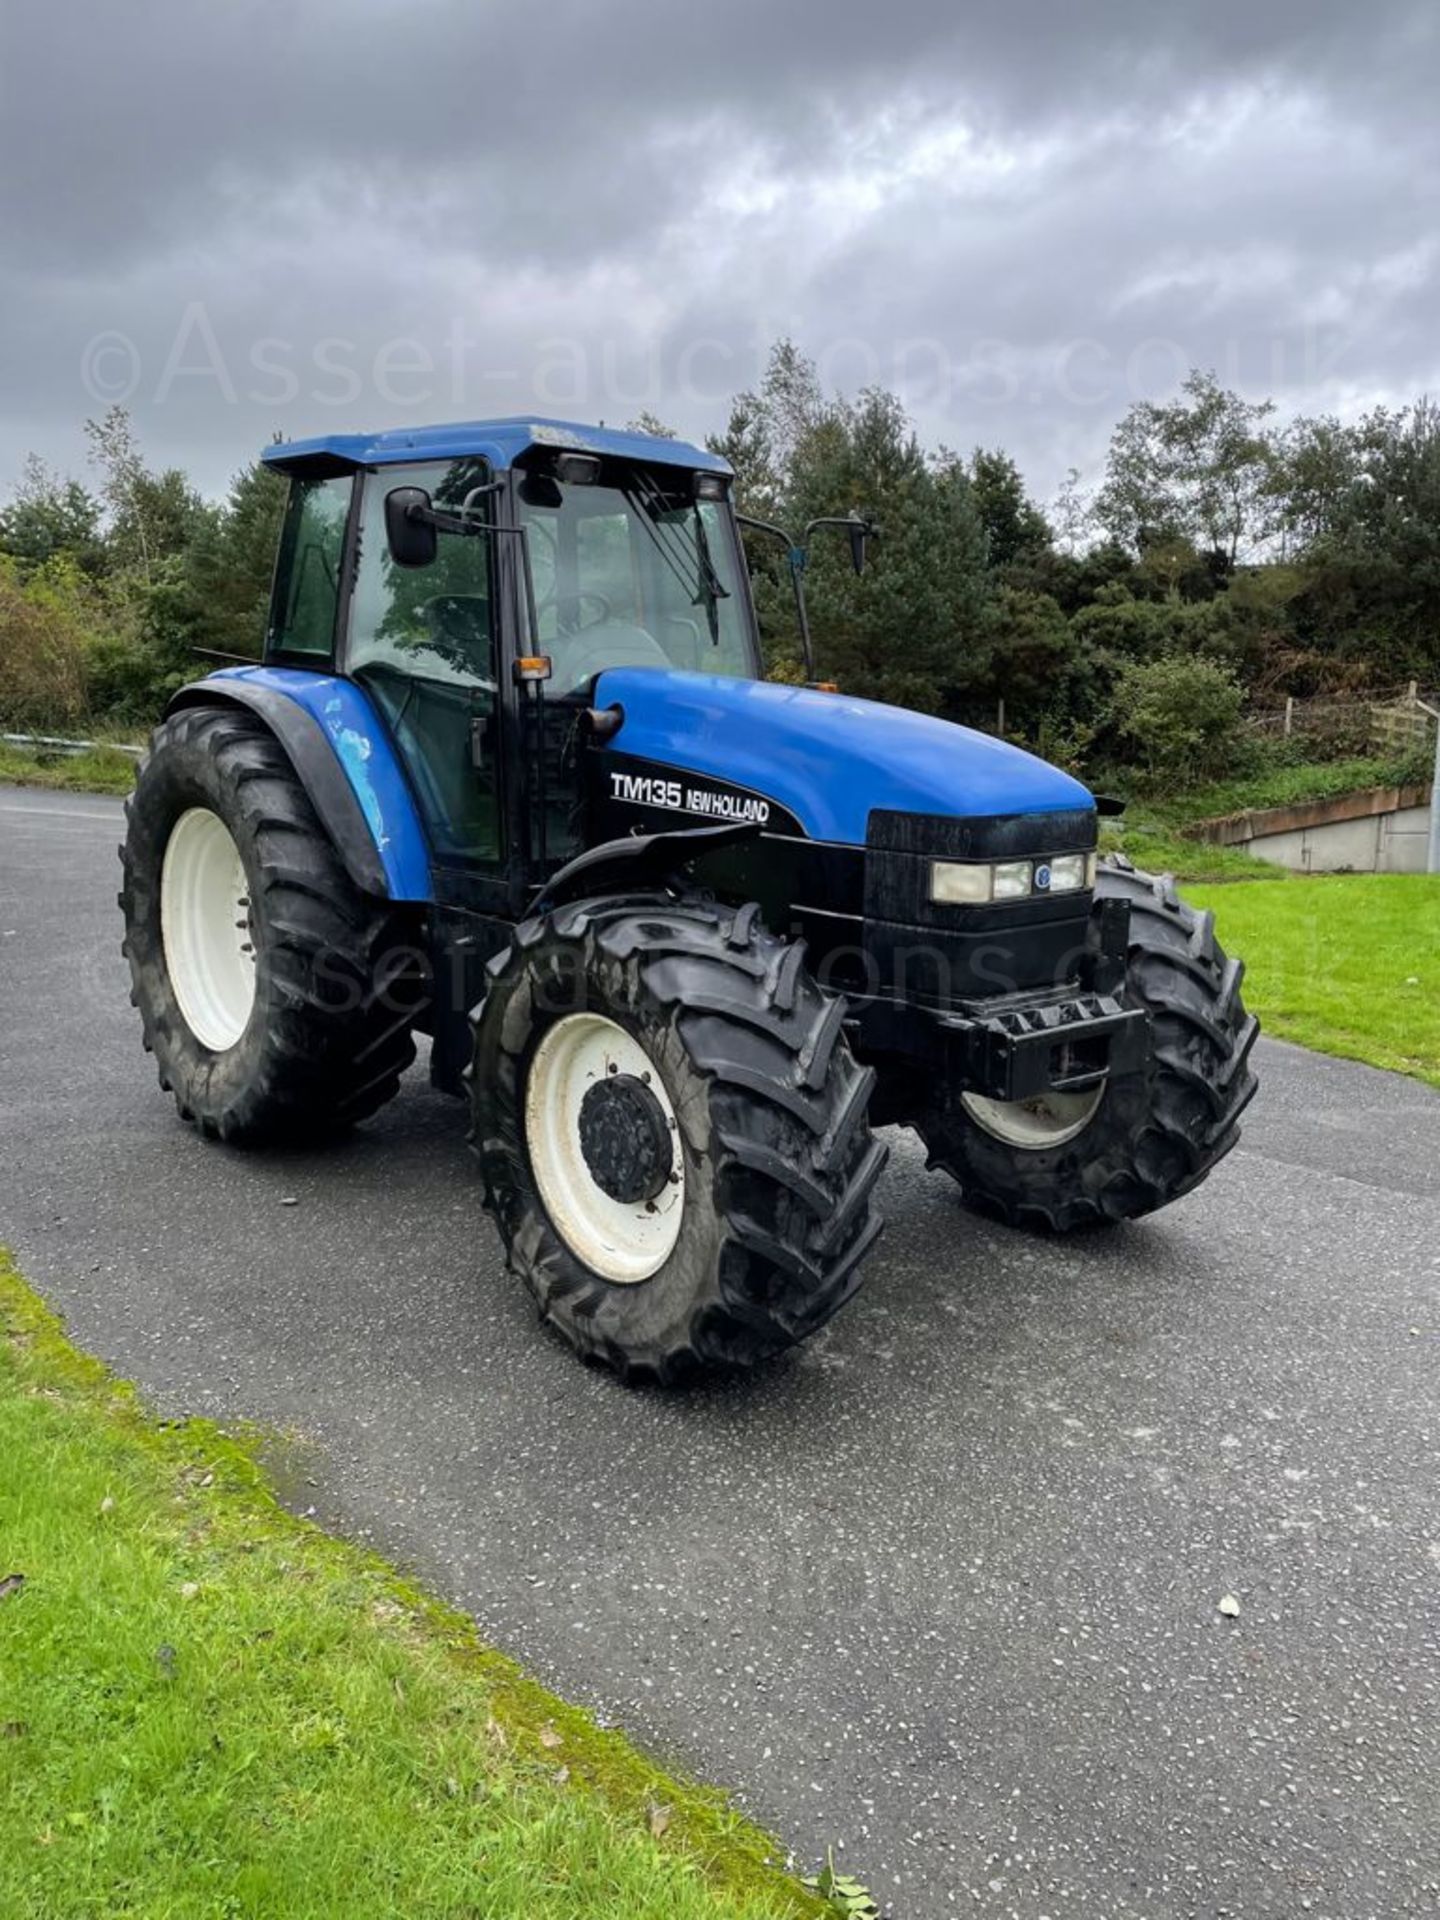 1997 NEW HOLLAND 8360 TRACTOR, APPROX 12000 HOURS, ENGINE GEARBOX AND HYDRAULICS WORKING PERFECTLY - Image 2 of 16